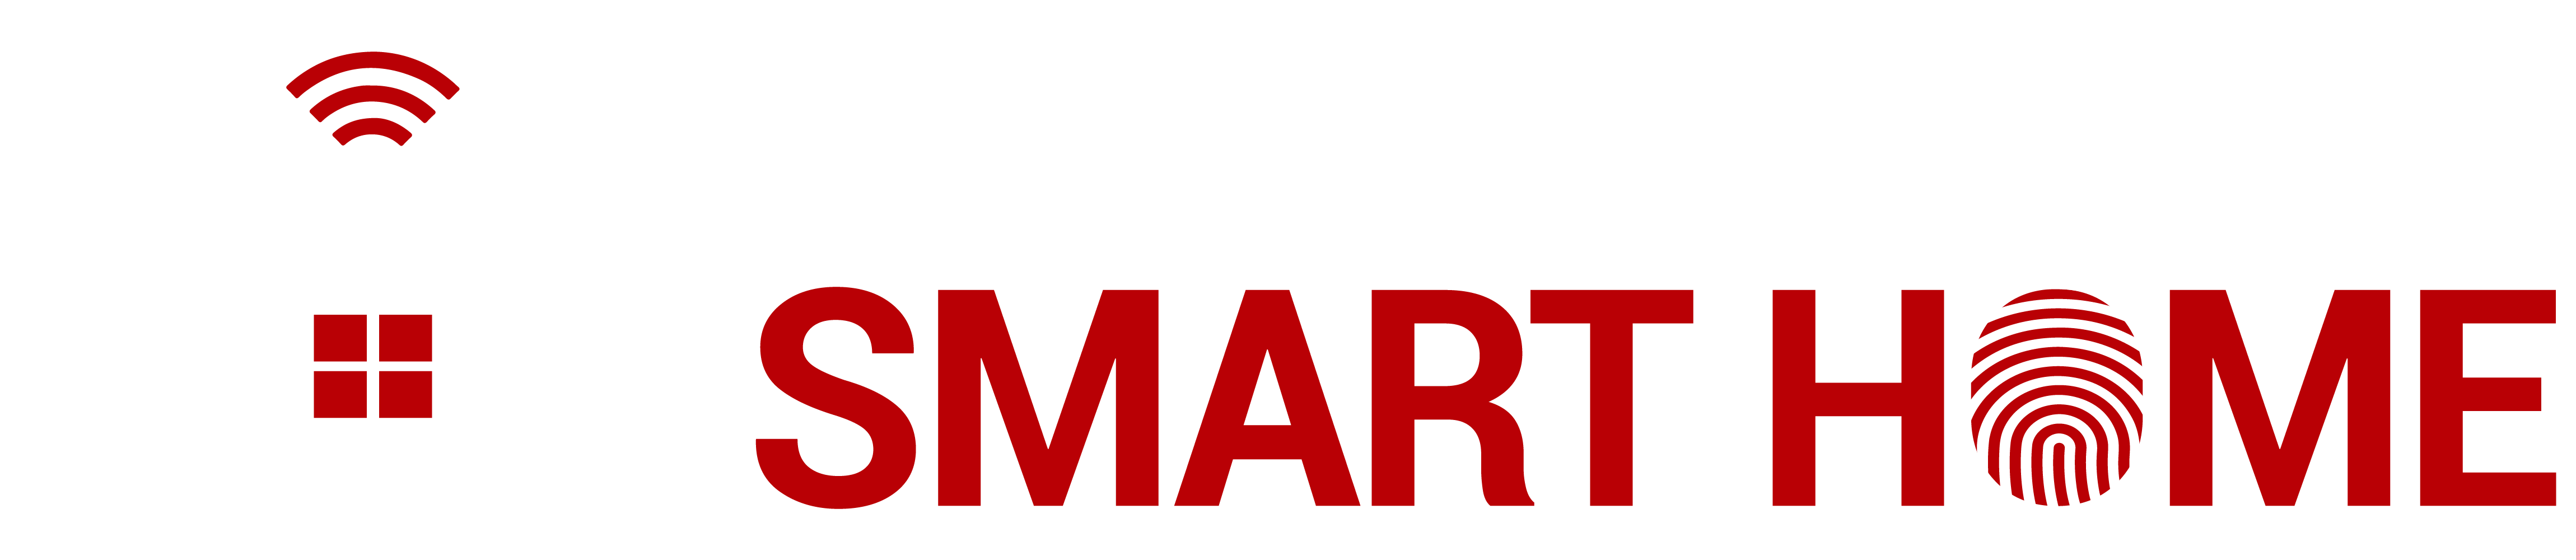 Everything Smart Home